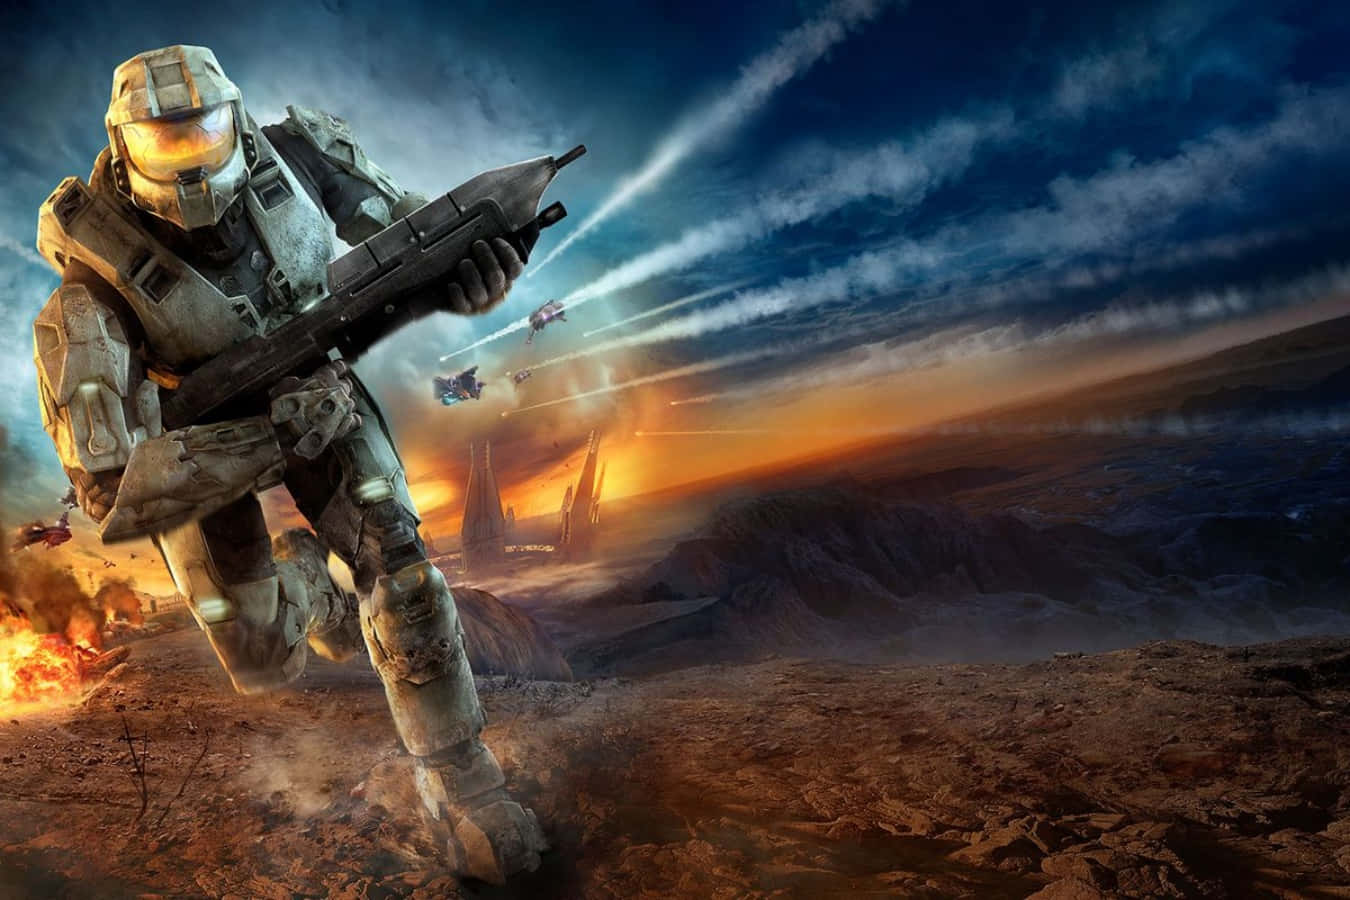 Join the fight against the Covenant in Halo